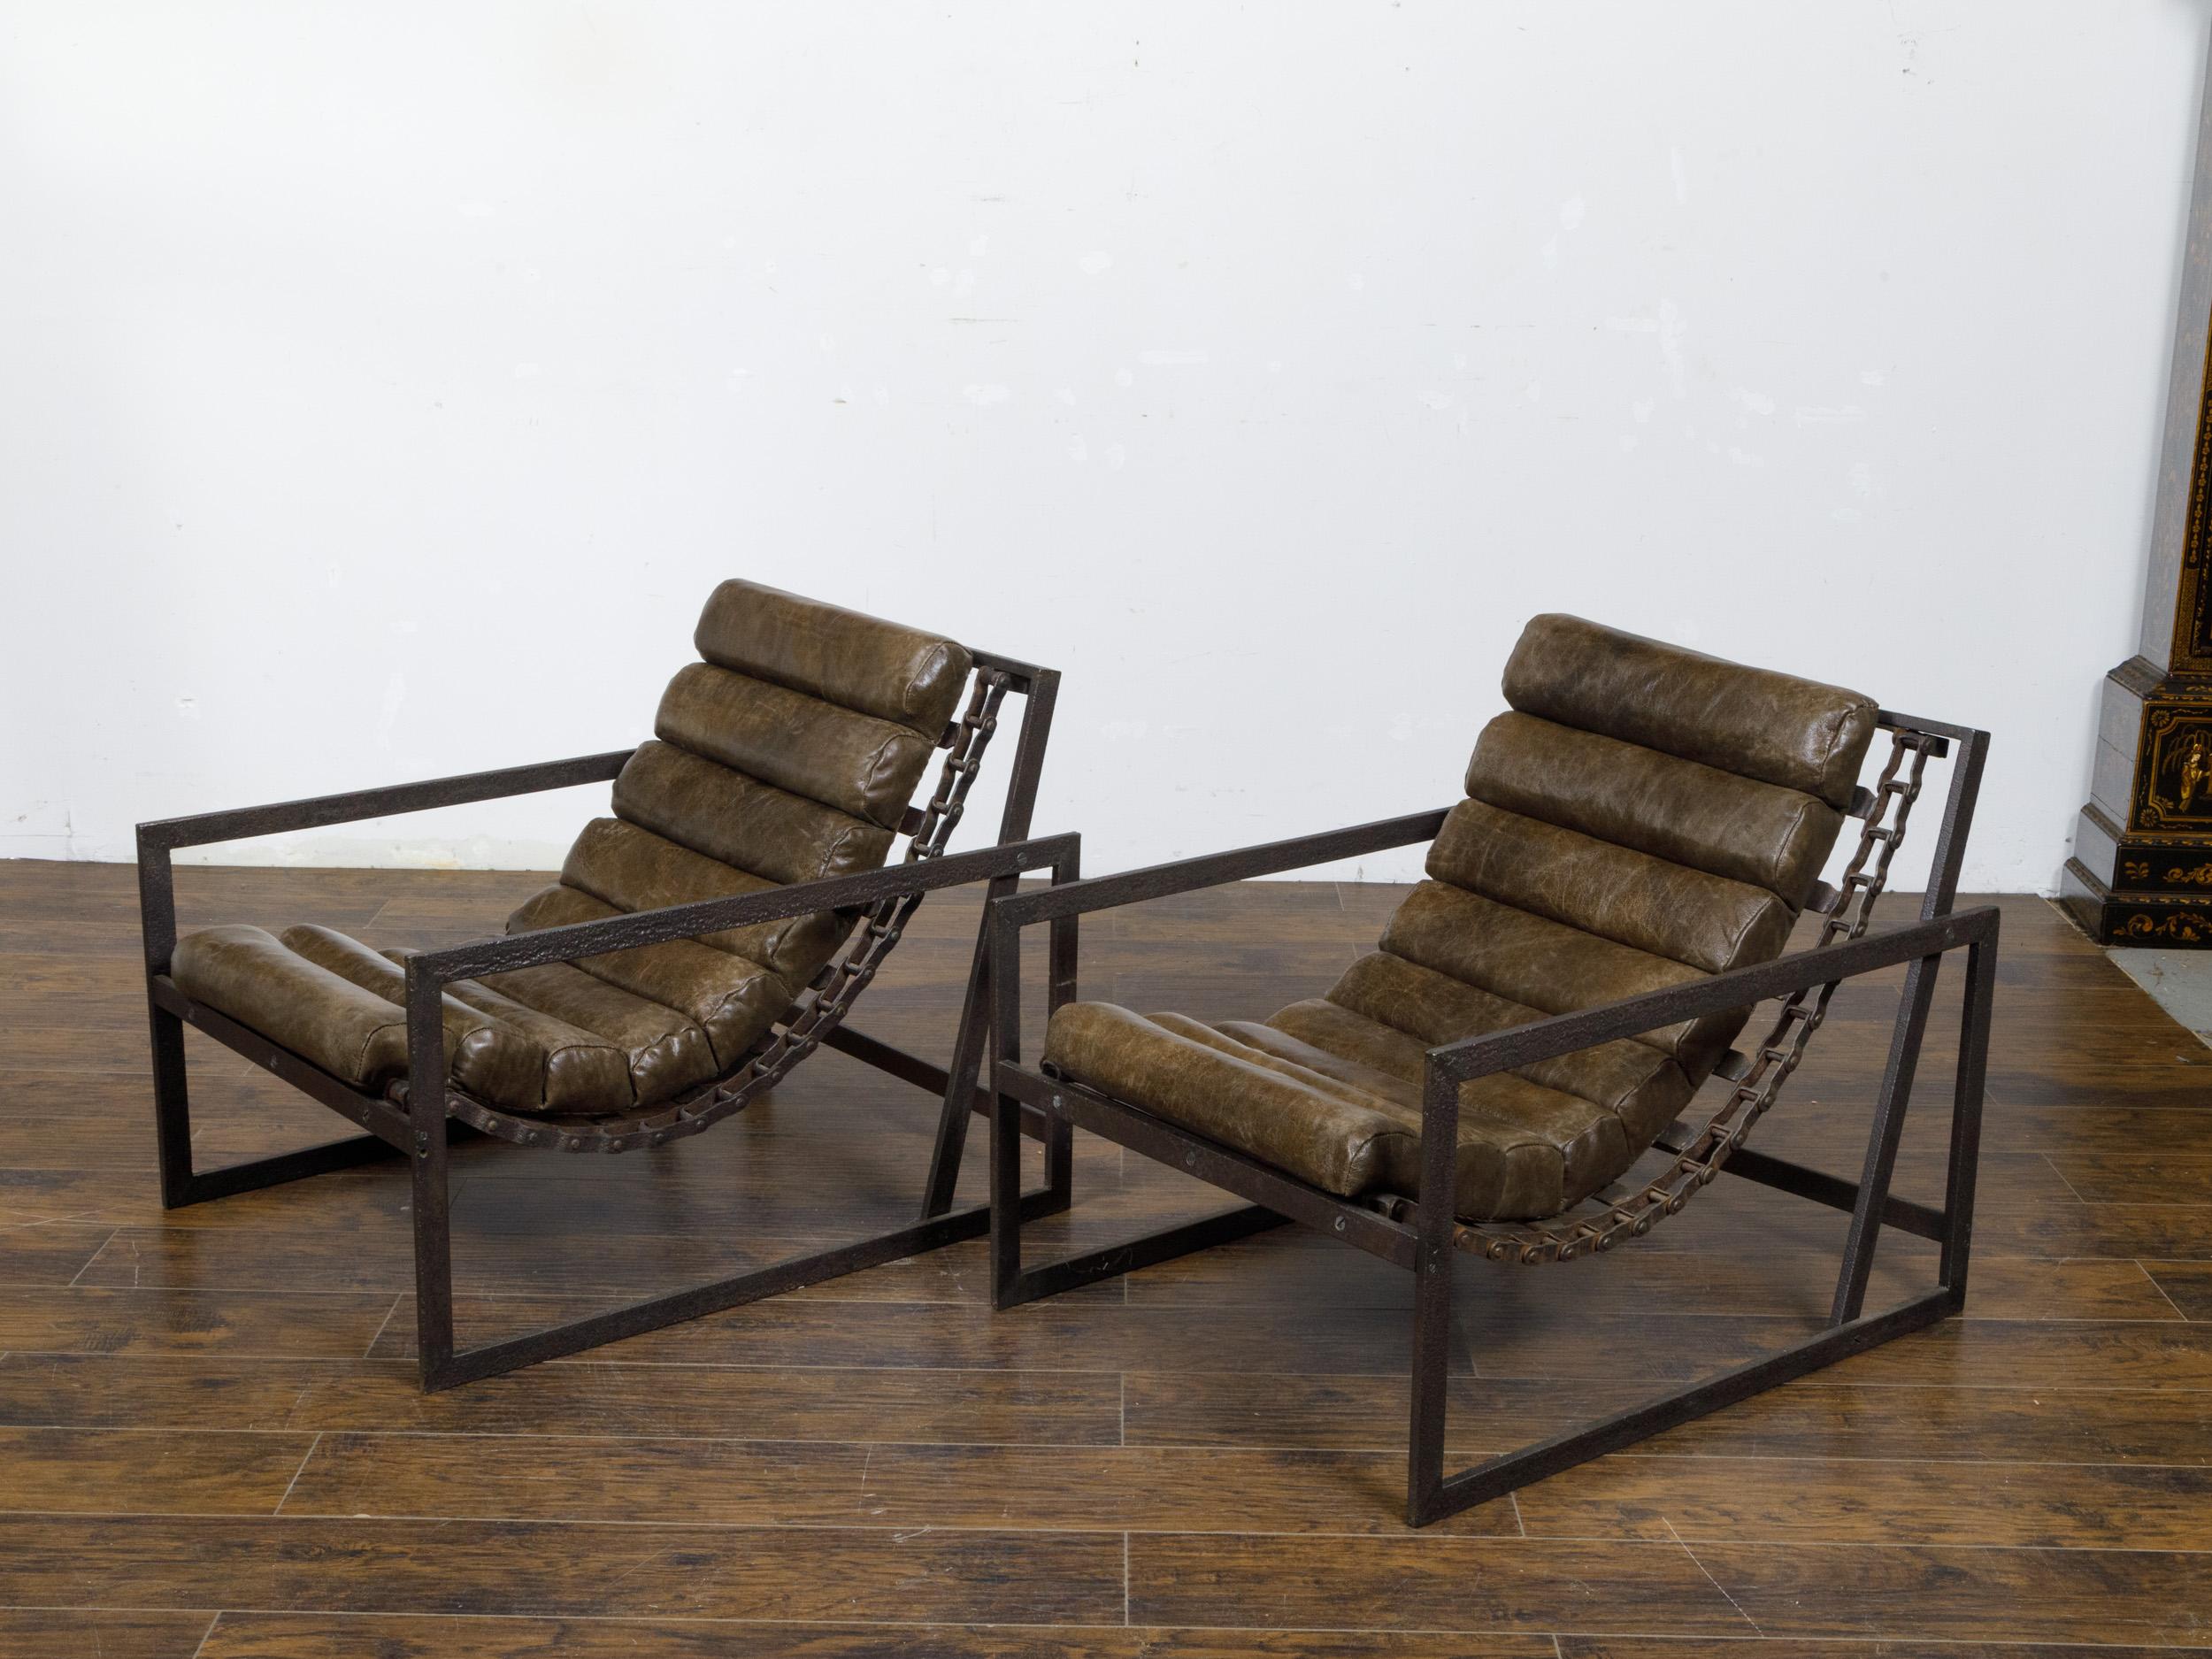 Pair of Industrial Iron Sling Transat Chairs with Brown Leather In Good Condition For Sale In Atlanta, GA